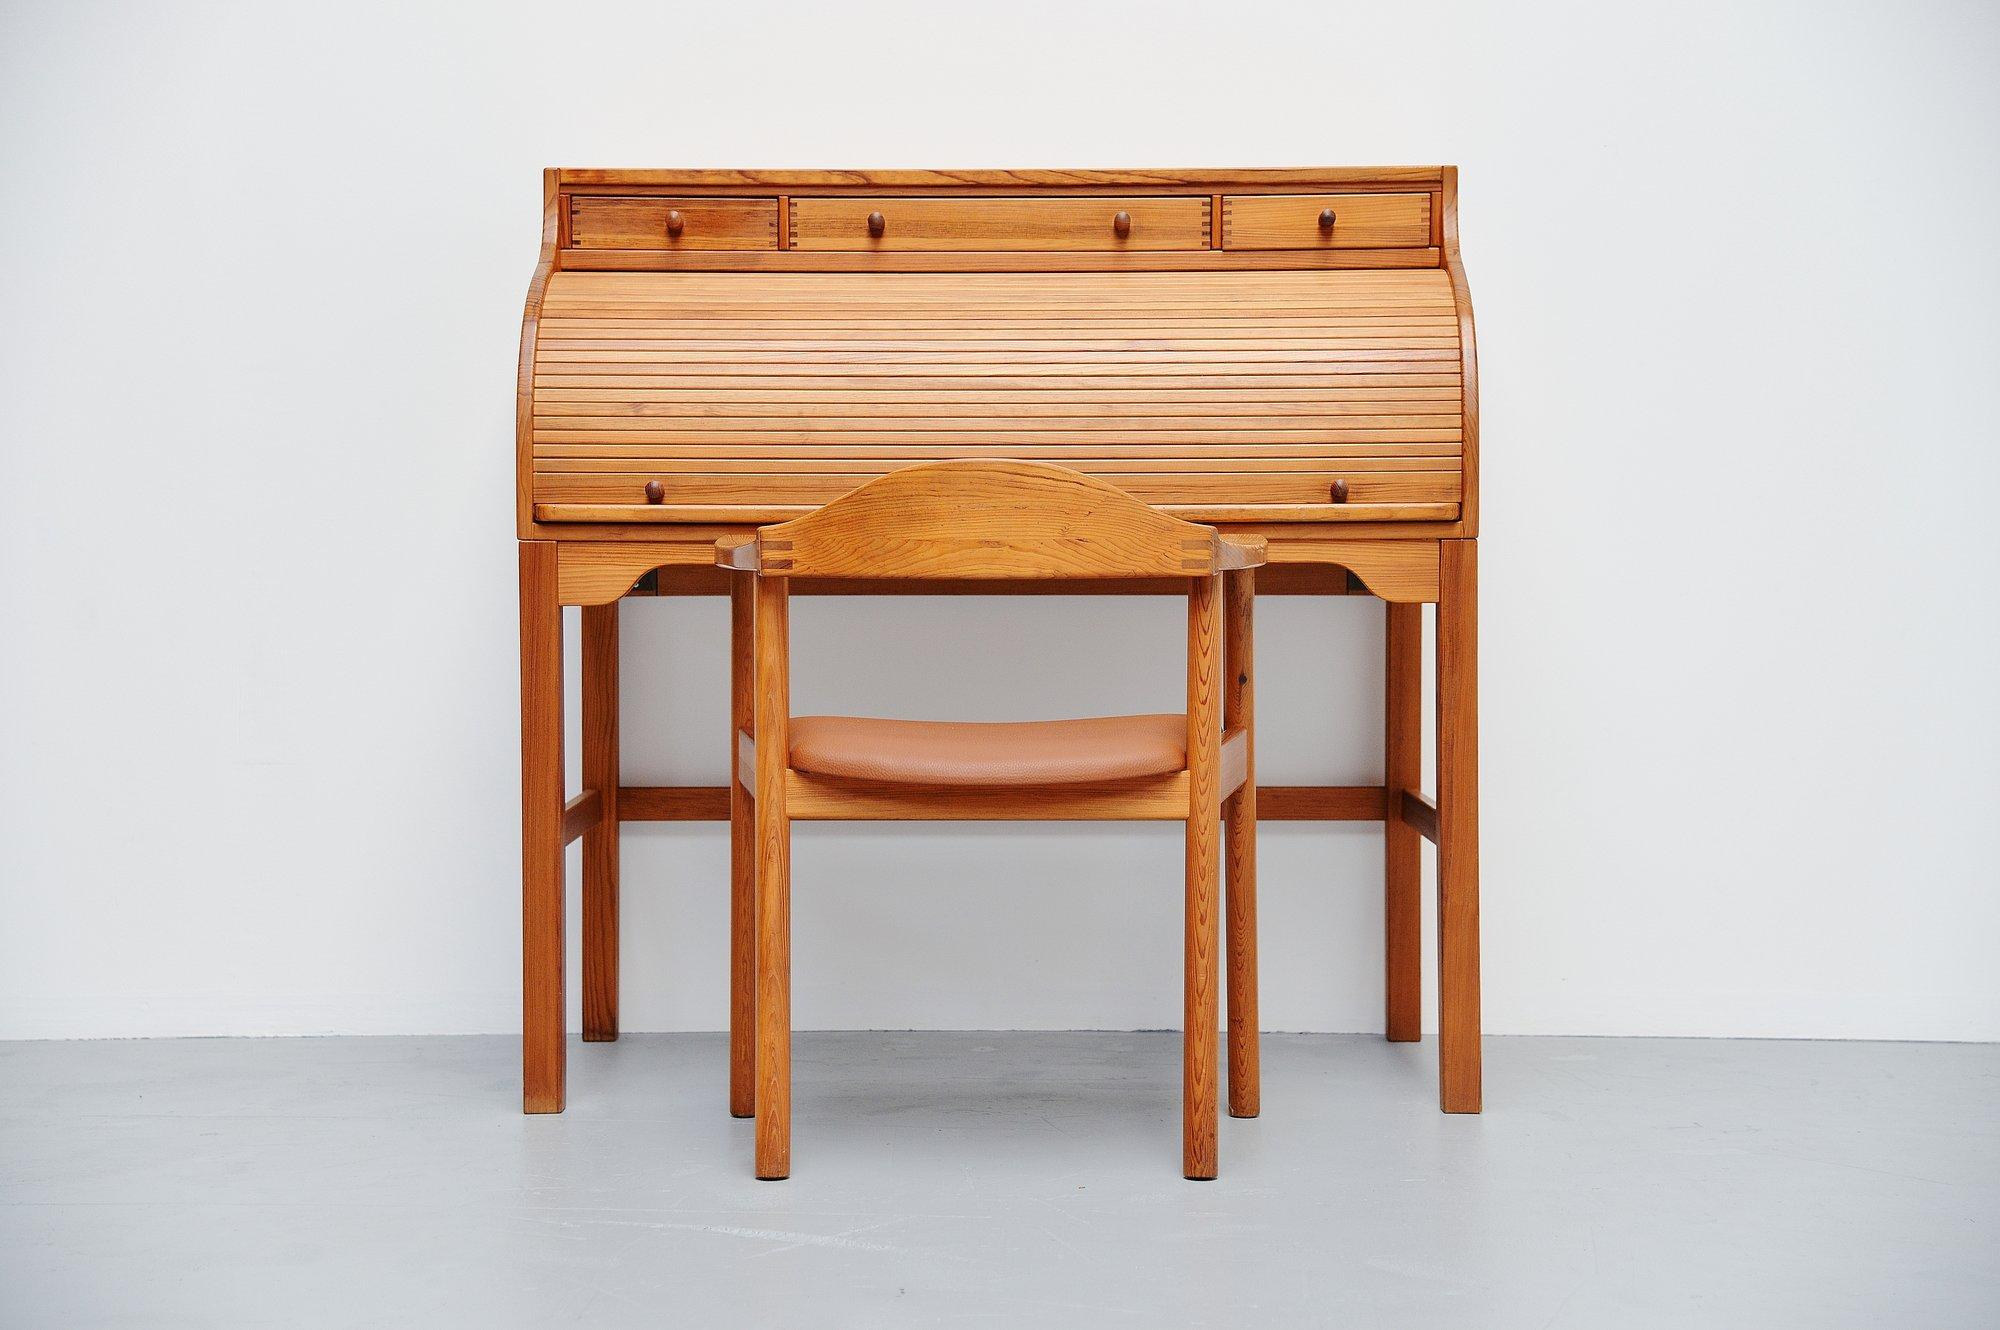 Very nice roll-top desk designed by Andreas Hansen and manufactured by Hadsten traeindustri, Denmark 1970. This desk is made of solid pine wood and is complete with matching desk chair. The desk has 3 drawers on top and a roll-top to close it and